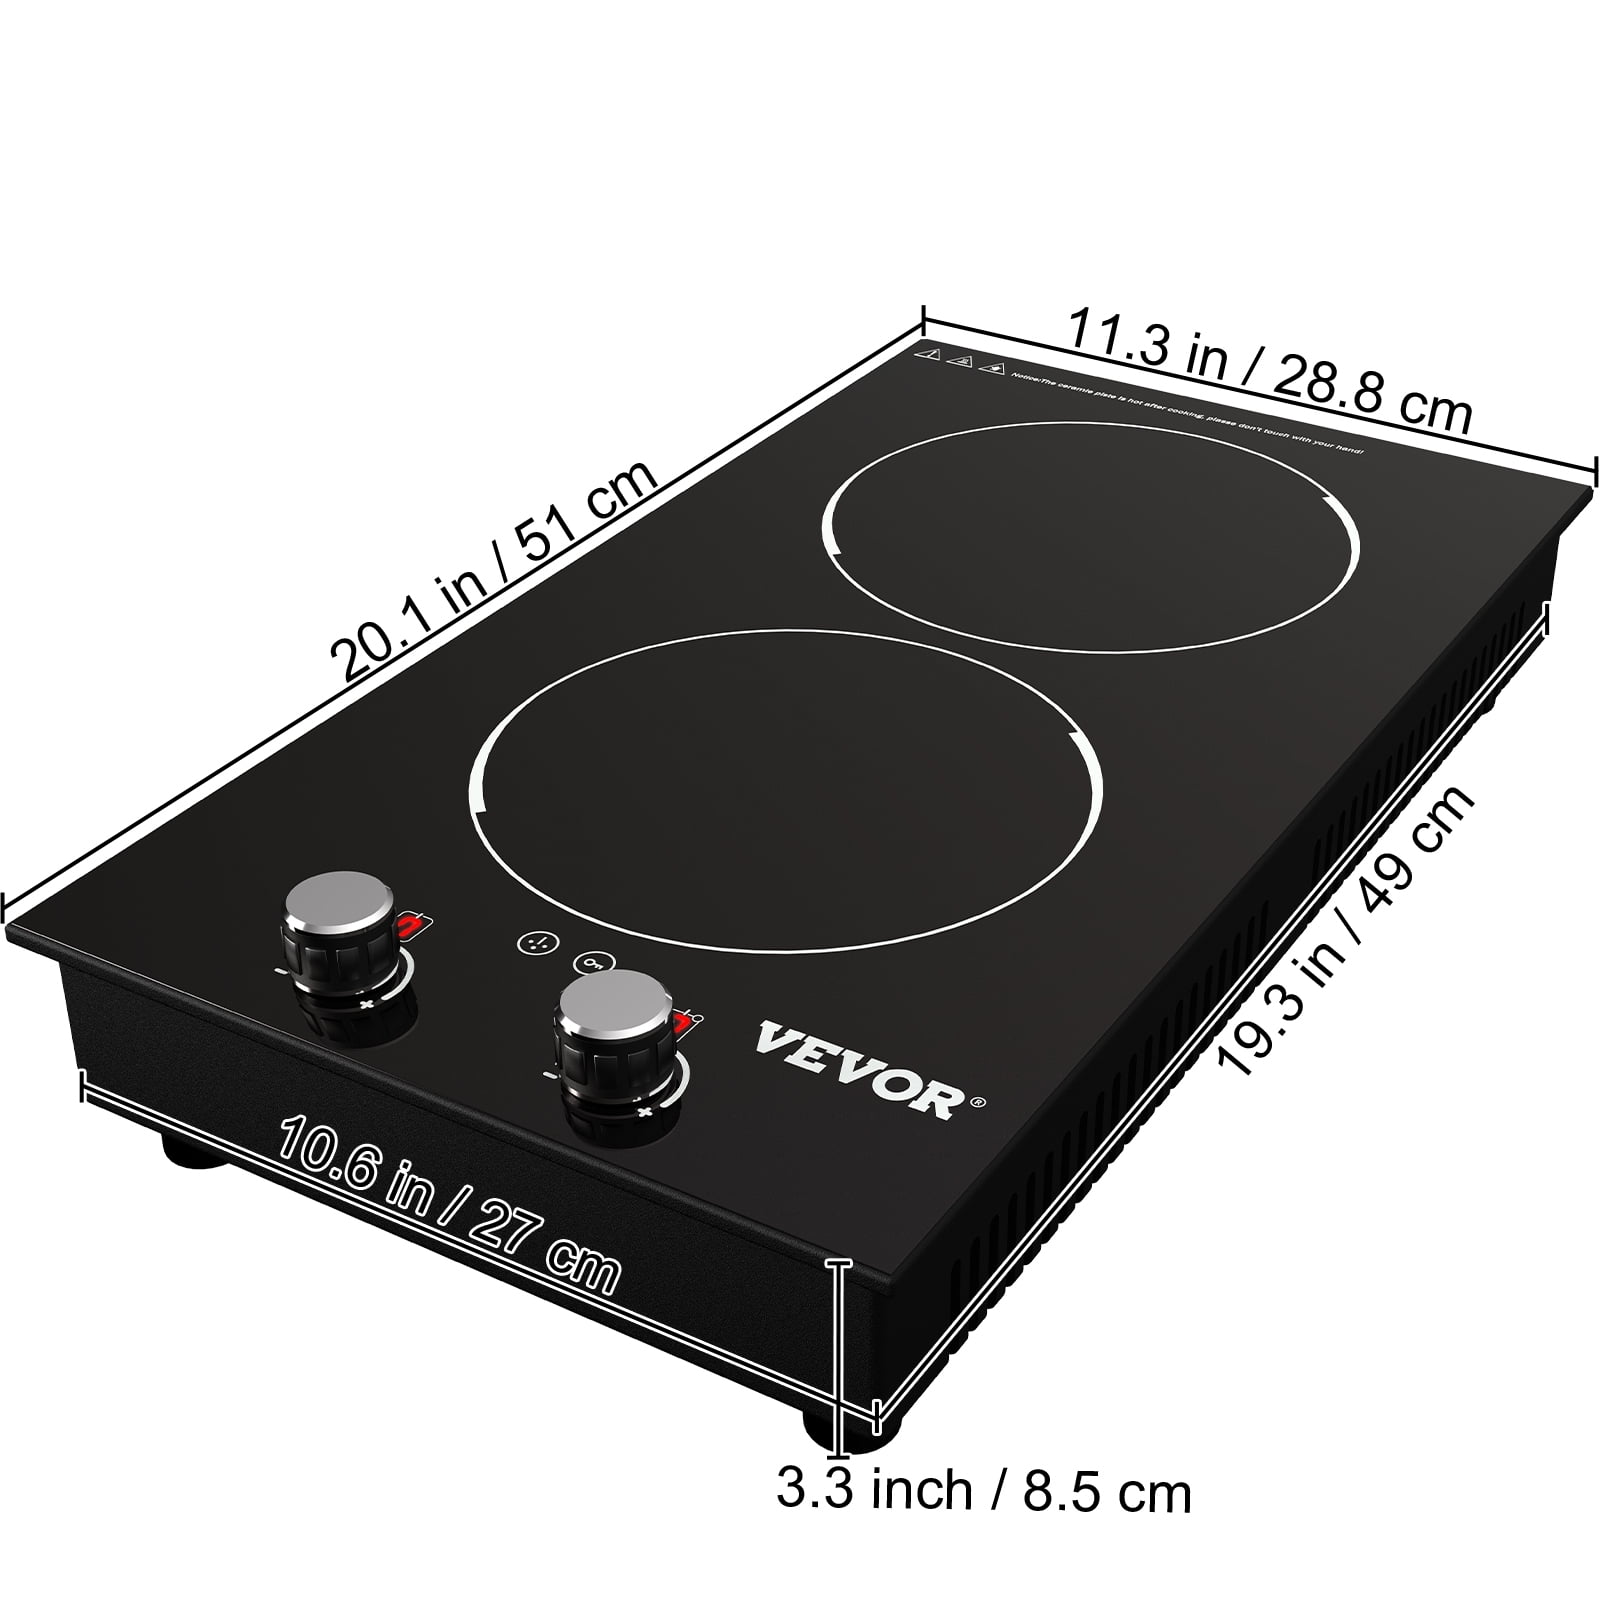 VEVOR 30.3 x 20.5 in. Built-in Induction Electric Cooktop in Black Stove Top  with 4 Modular Burners Ceramic Glass QRSCKDC30220VG35MV4 - The Home Depot